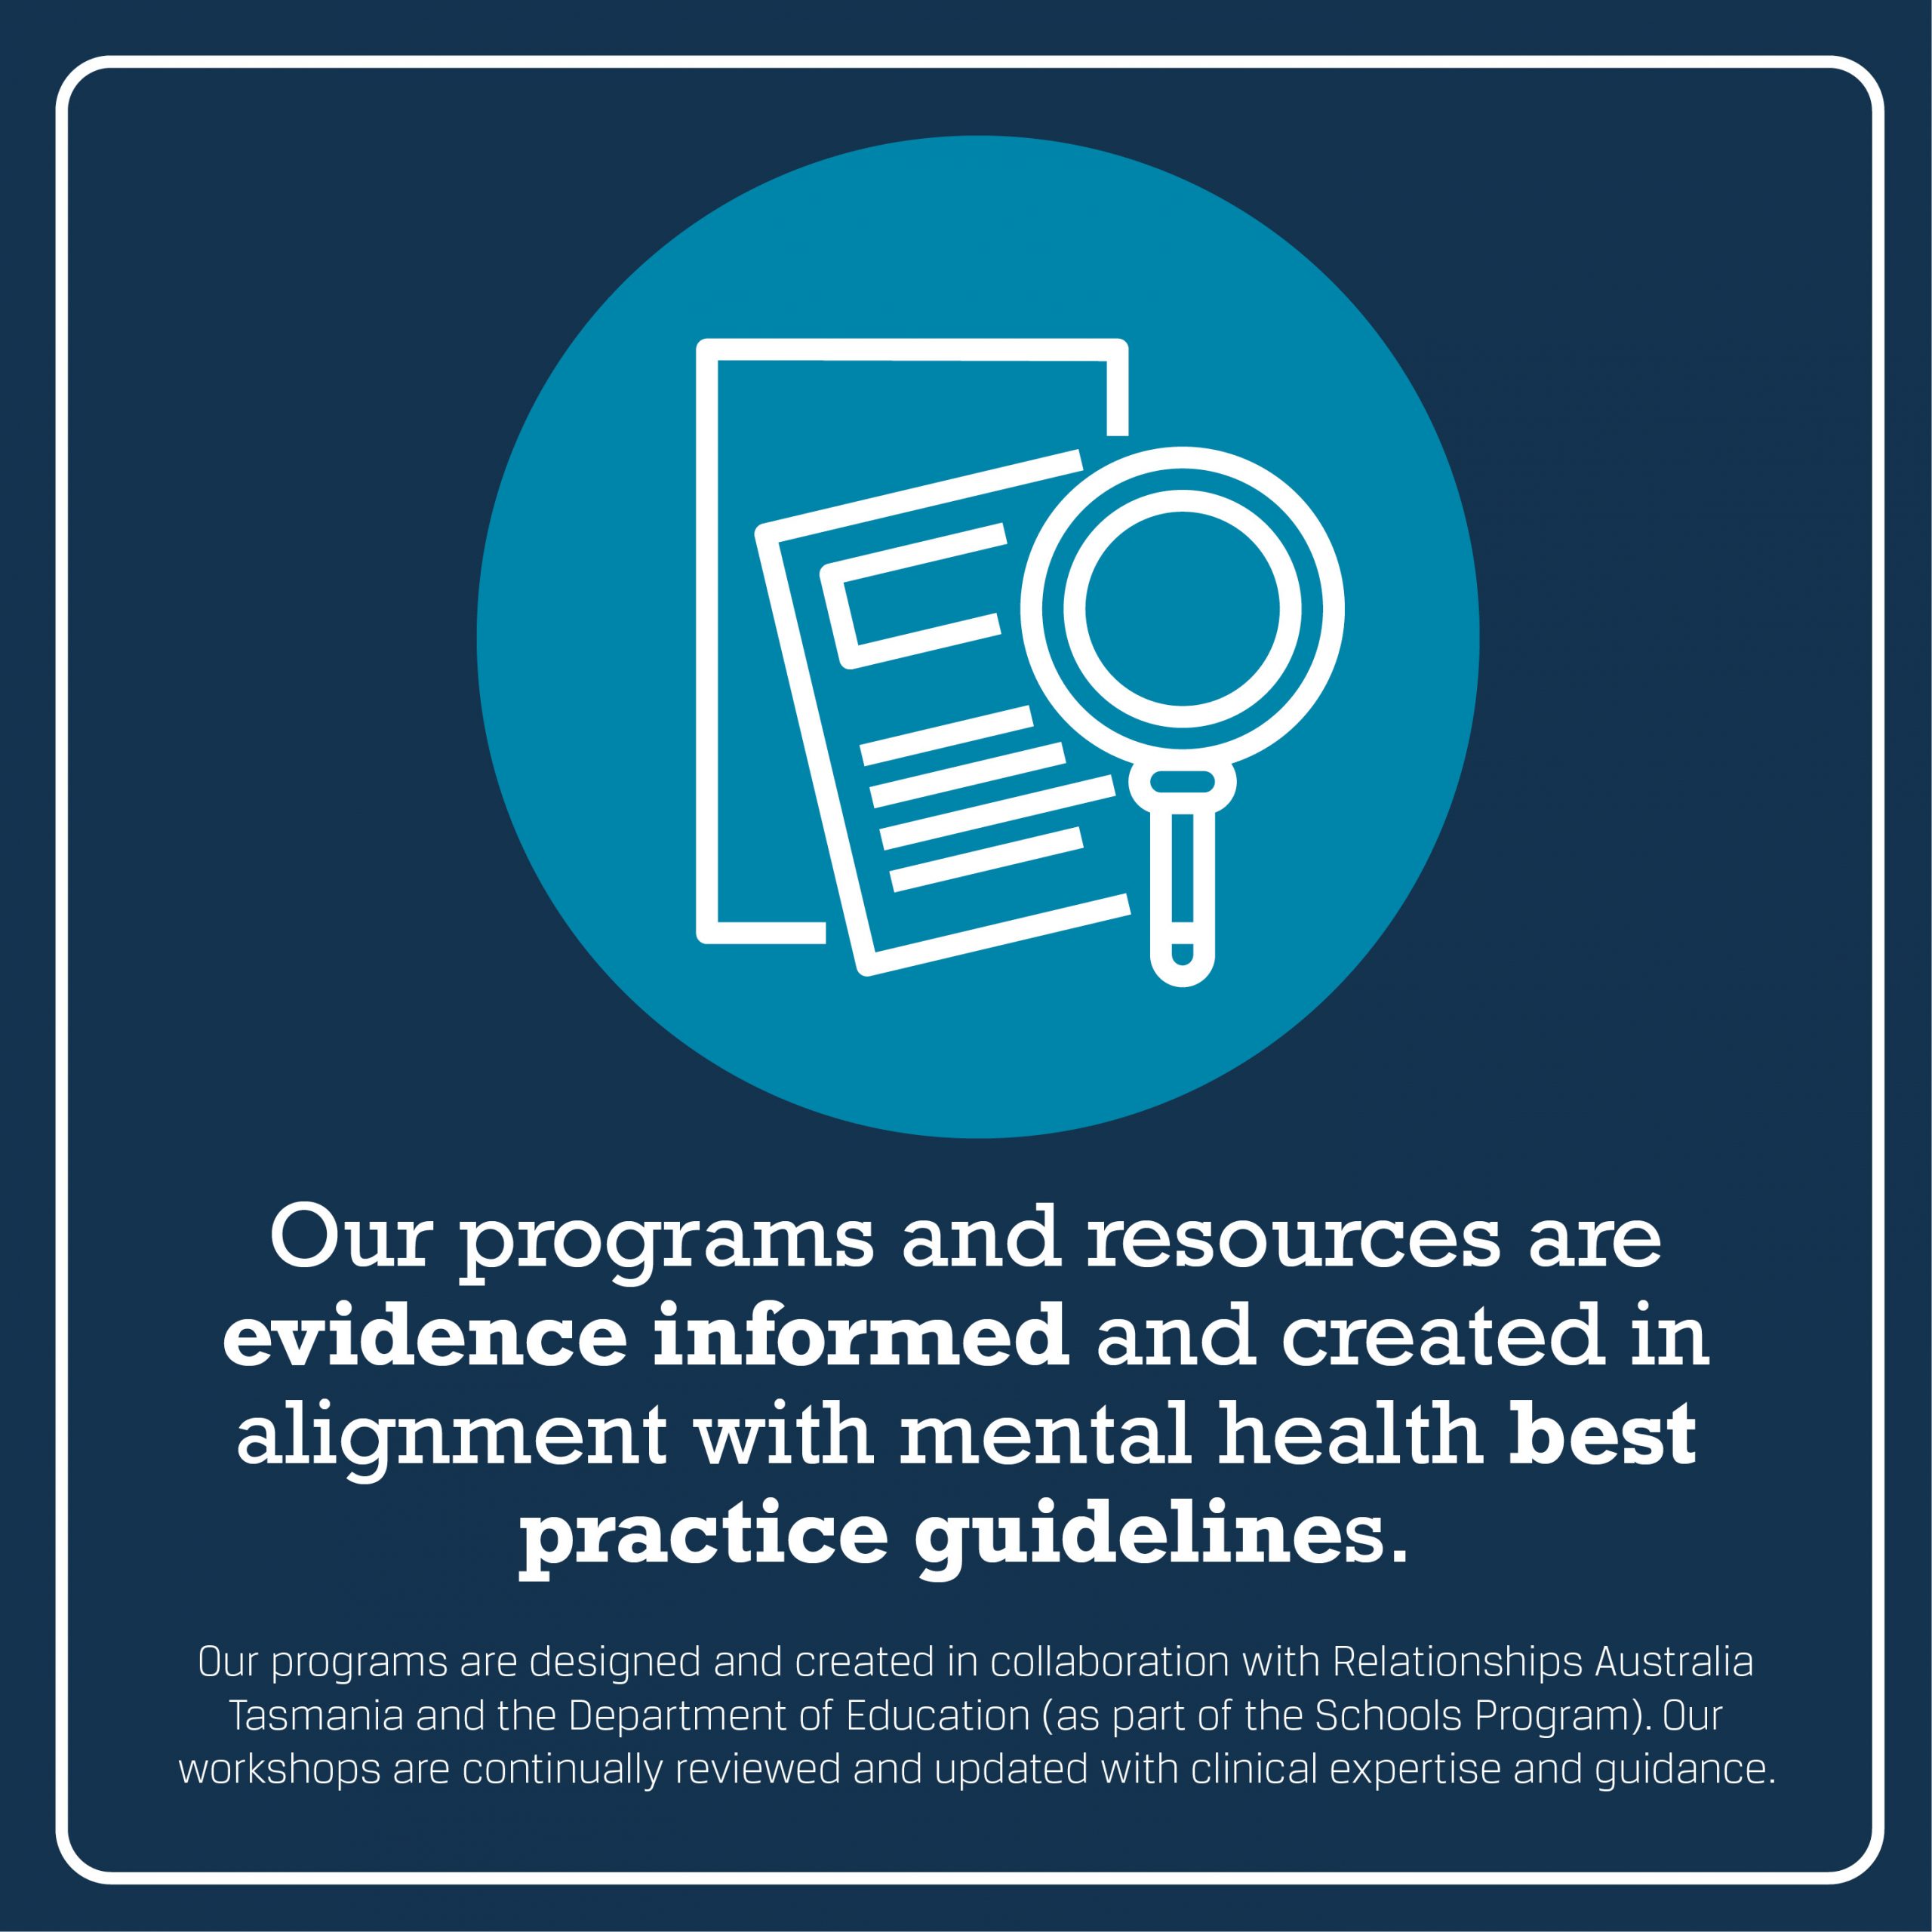 Stay ChatTY - Our programs and resources are evidence informed and created in alignment with mental health best practice guidelines.